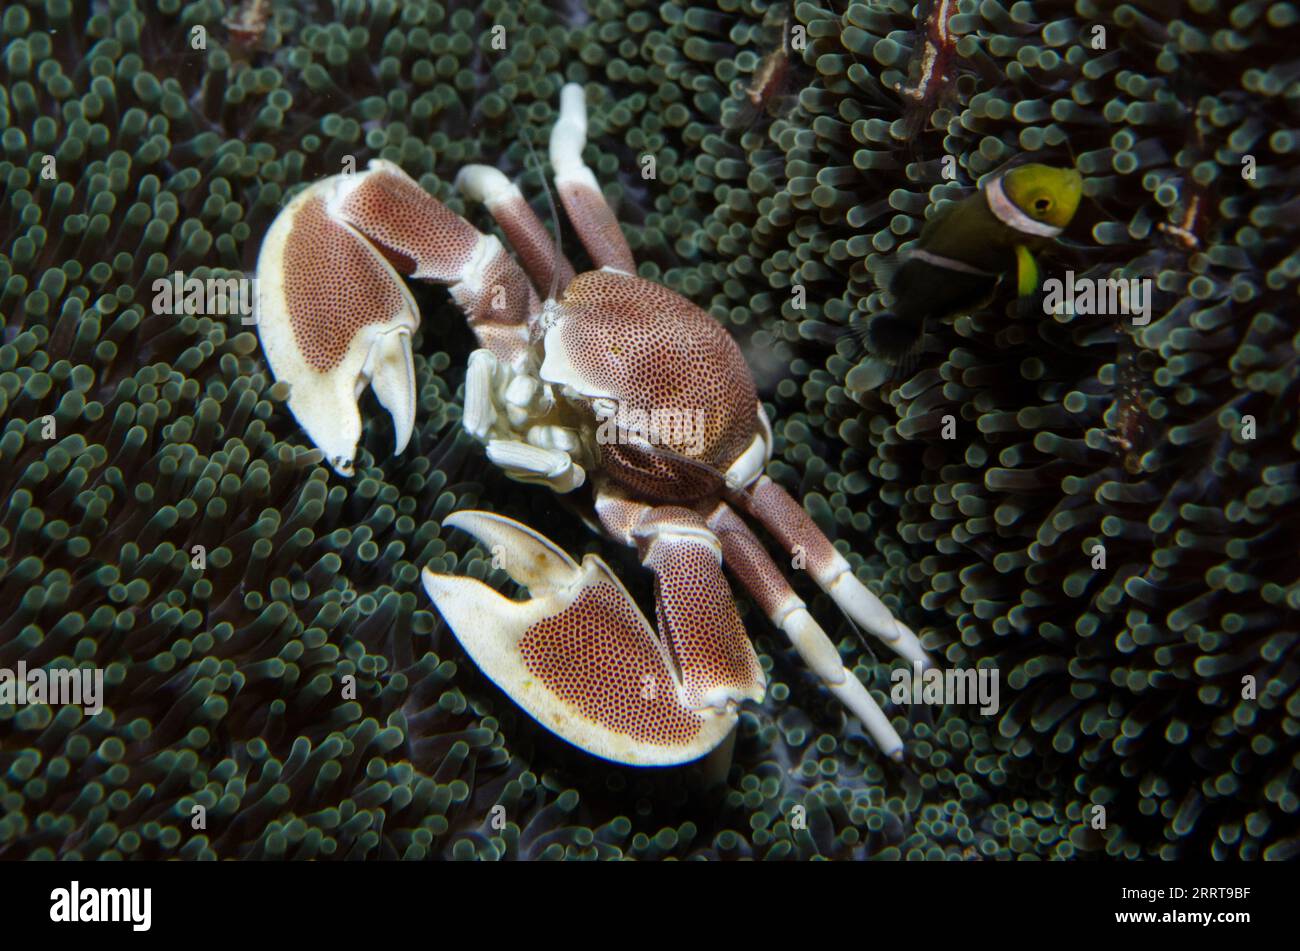 Porcelain Crab, Neopetrolisthes maculatus, with Saddleback Anemonefish, Amphiprion polymnus, and Commensal Shrimps, Periclimenes sp, on Giant Carpet A Stock Photo